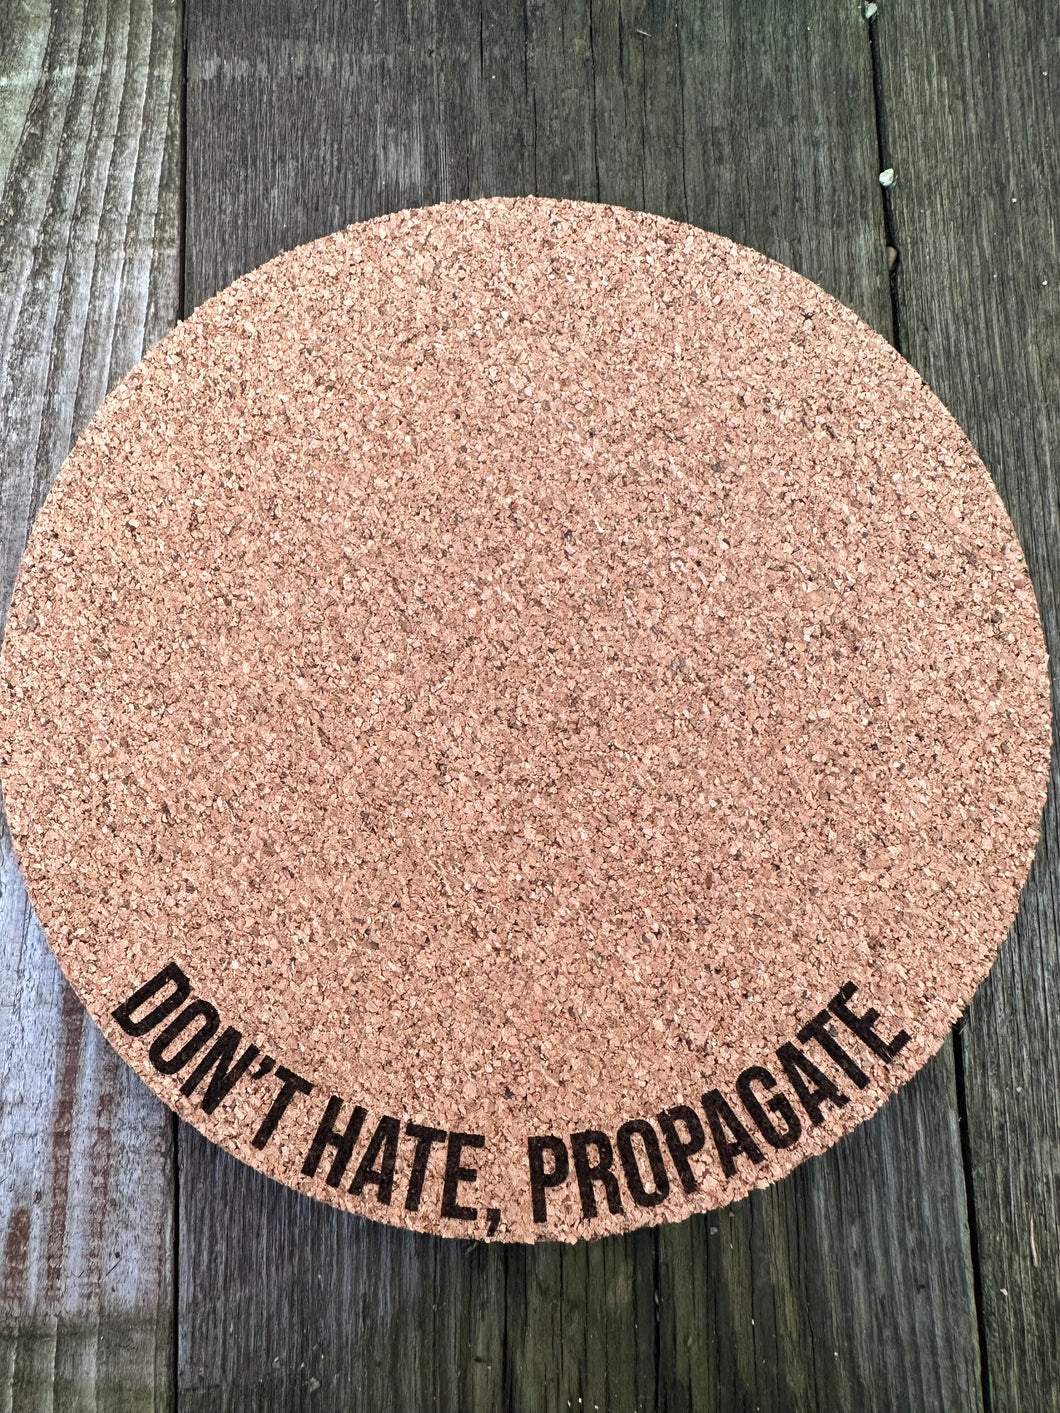 Don't Hate Propagate Cork Plant Mat - Engraved Cork Round - Cork Bottom - No Plastic or Rubber - All Natural Material